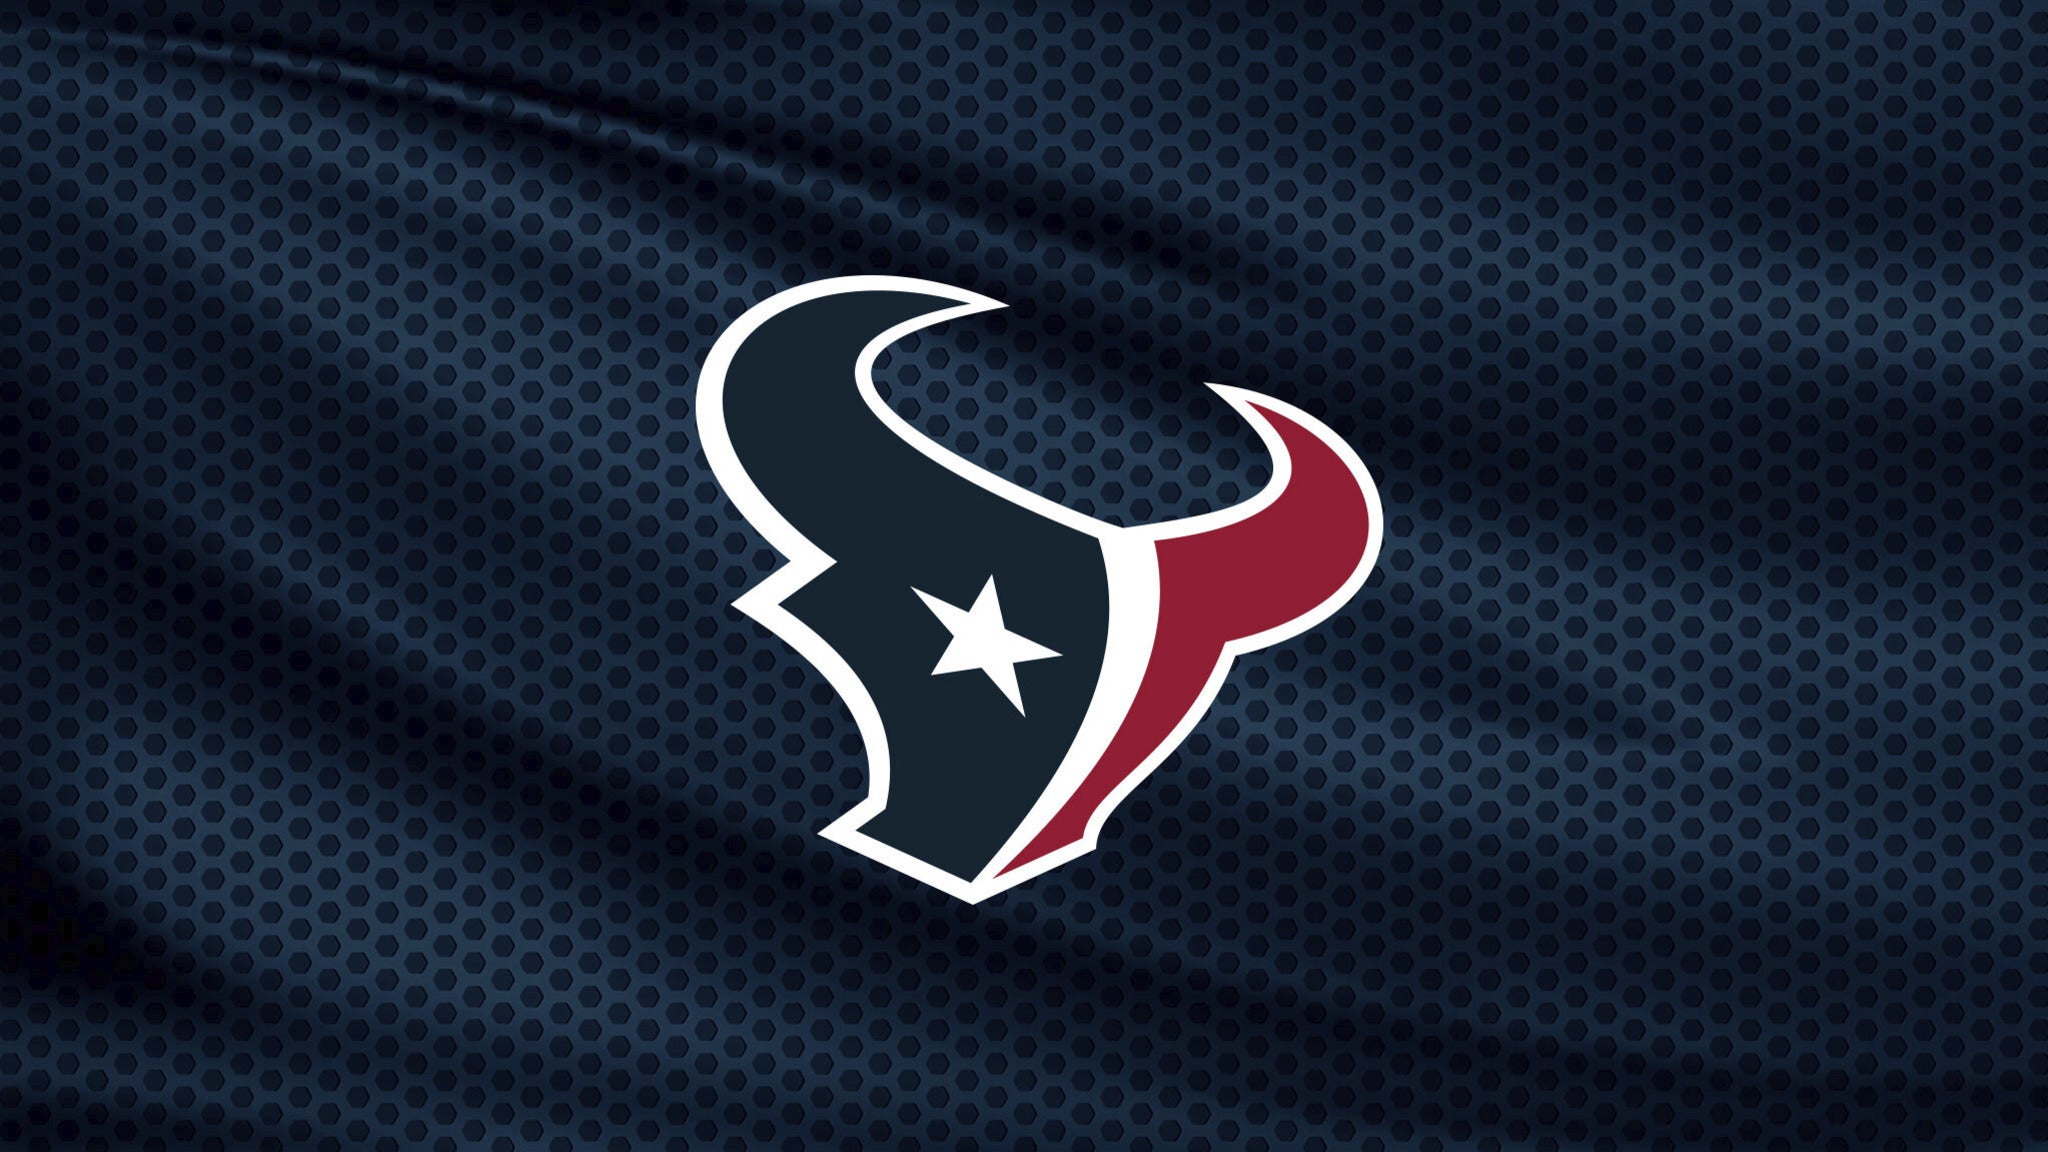 texans tickets cost